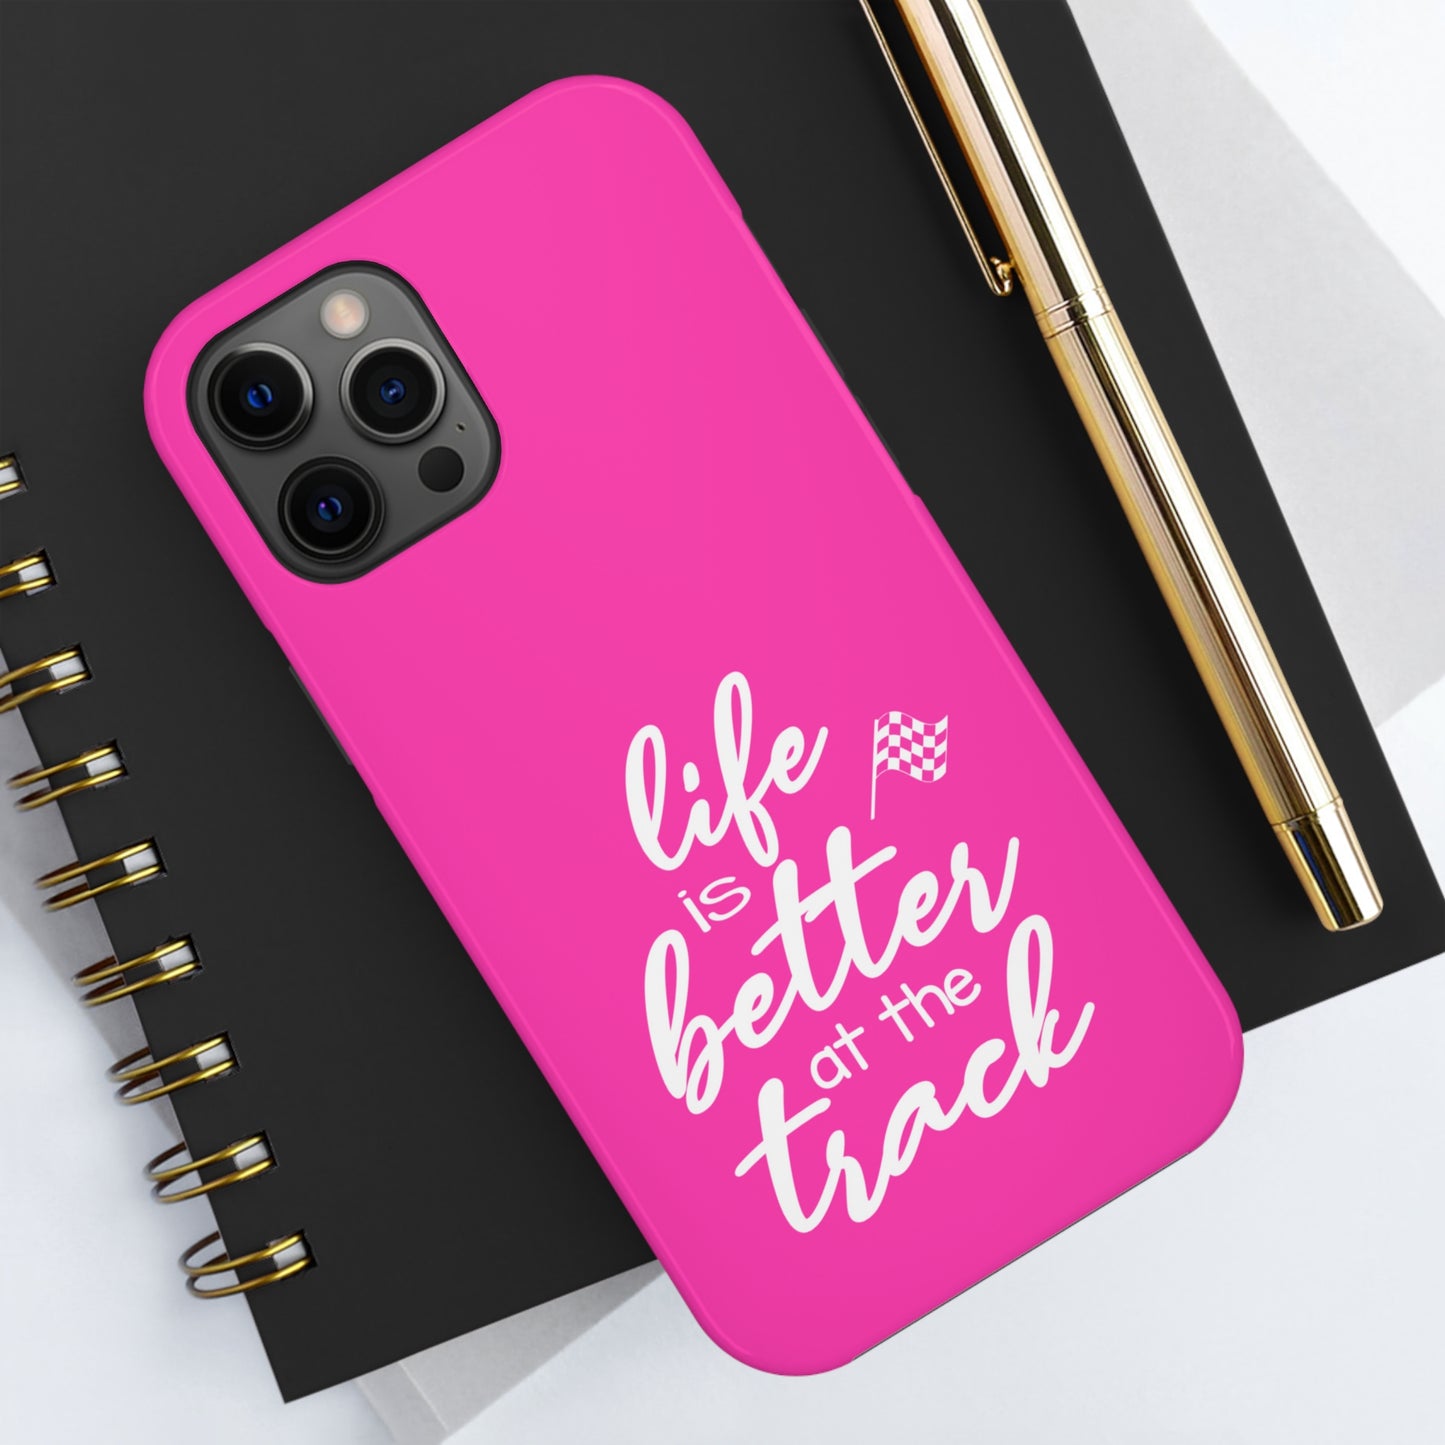 Life Is Better At The Track Pink IPhone Cases